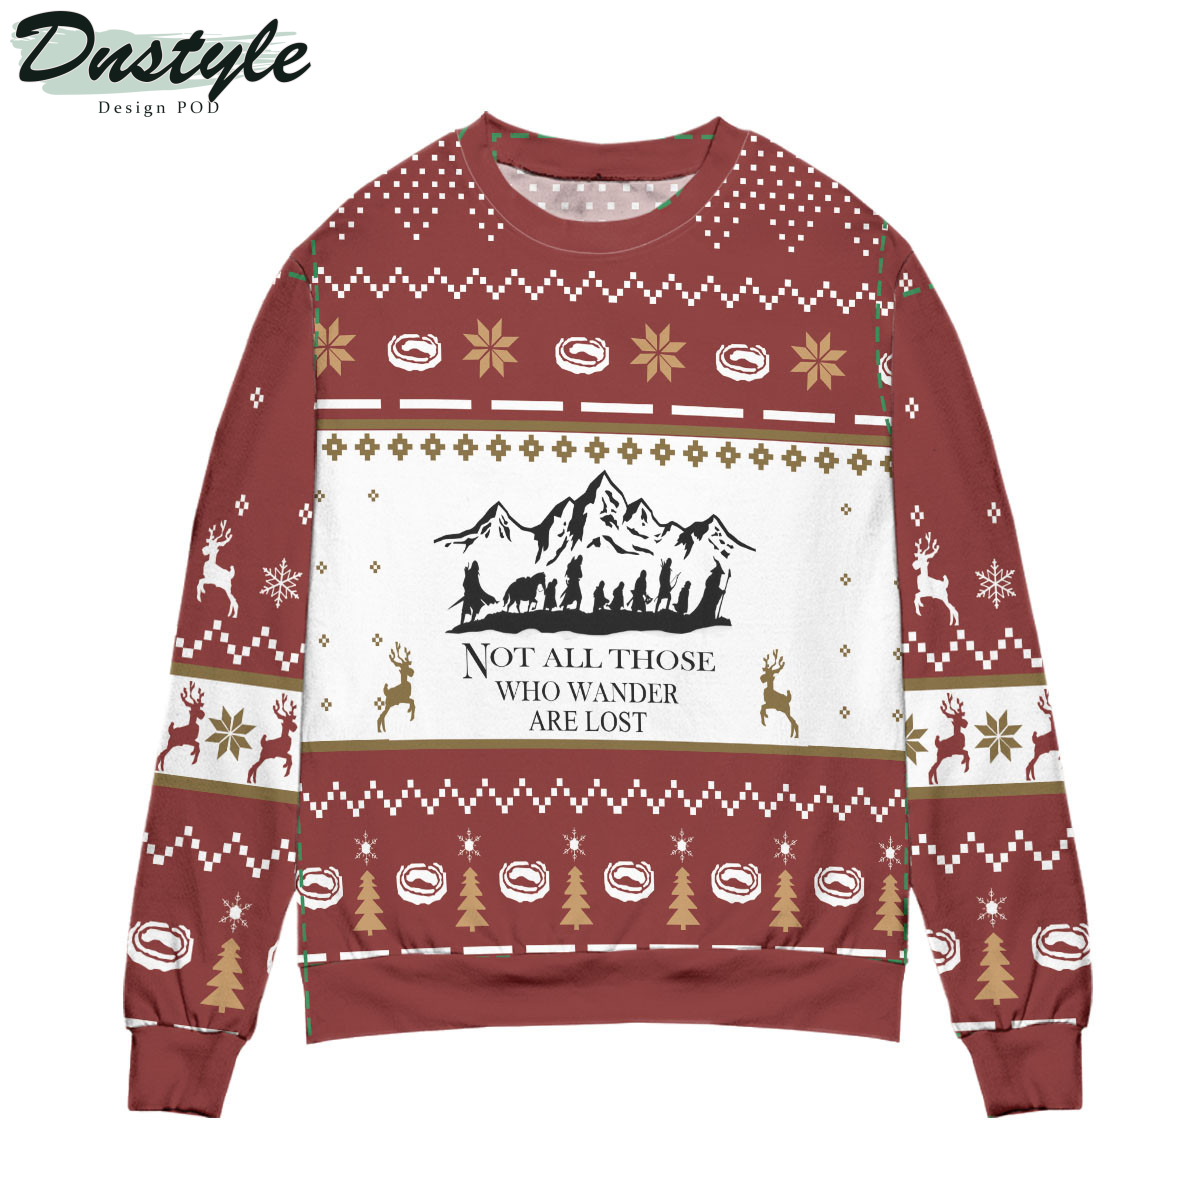 Not All Those Wander Are Lost Ugly Christmas Sweater